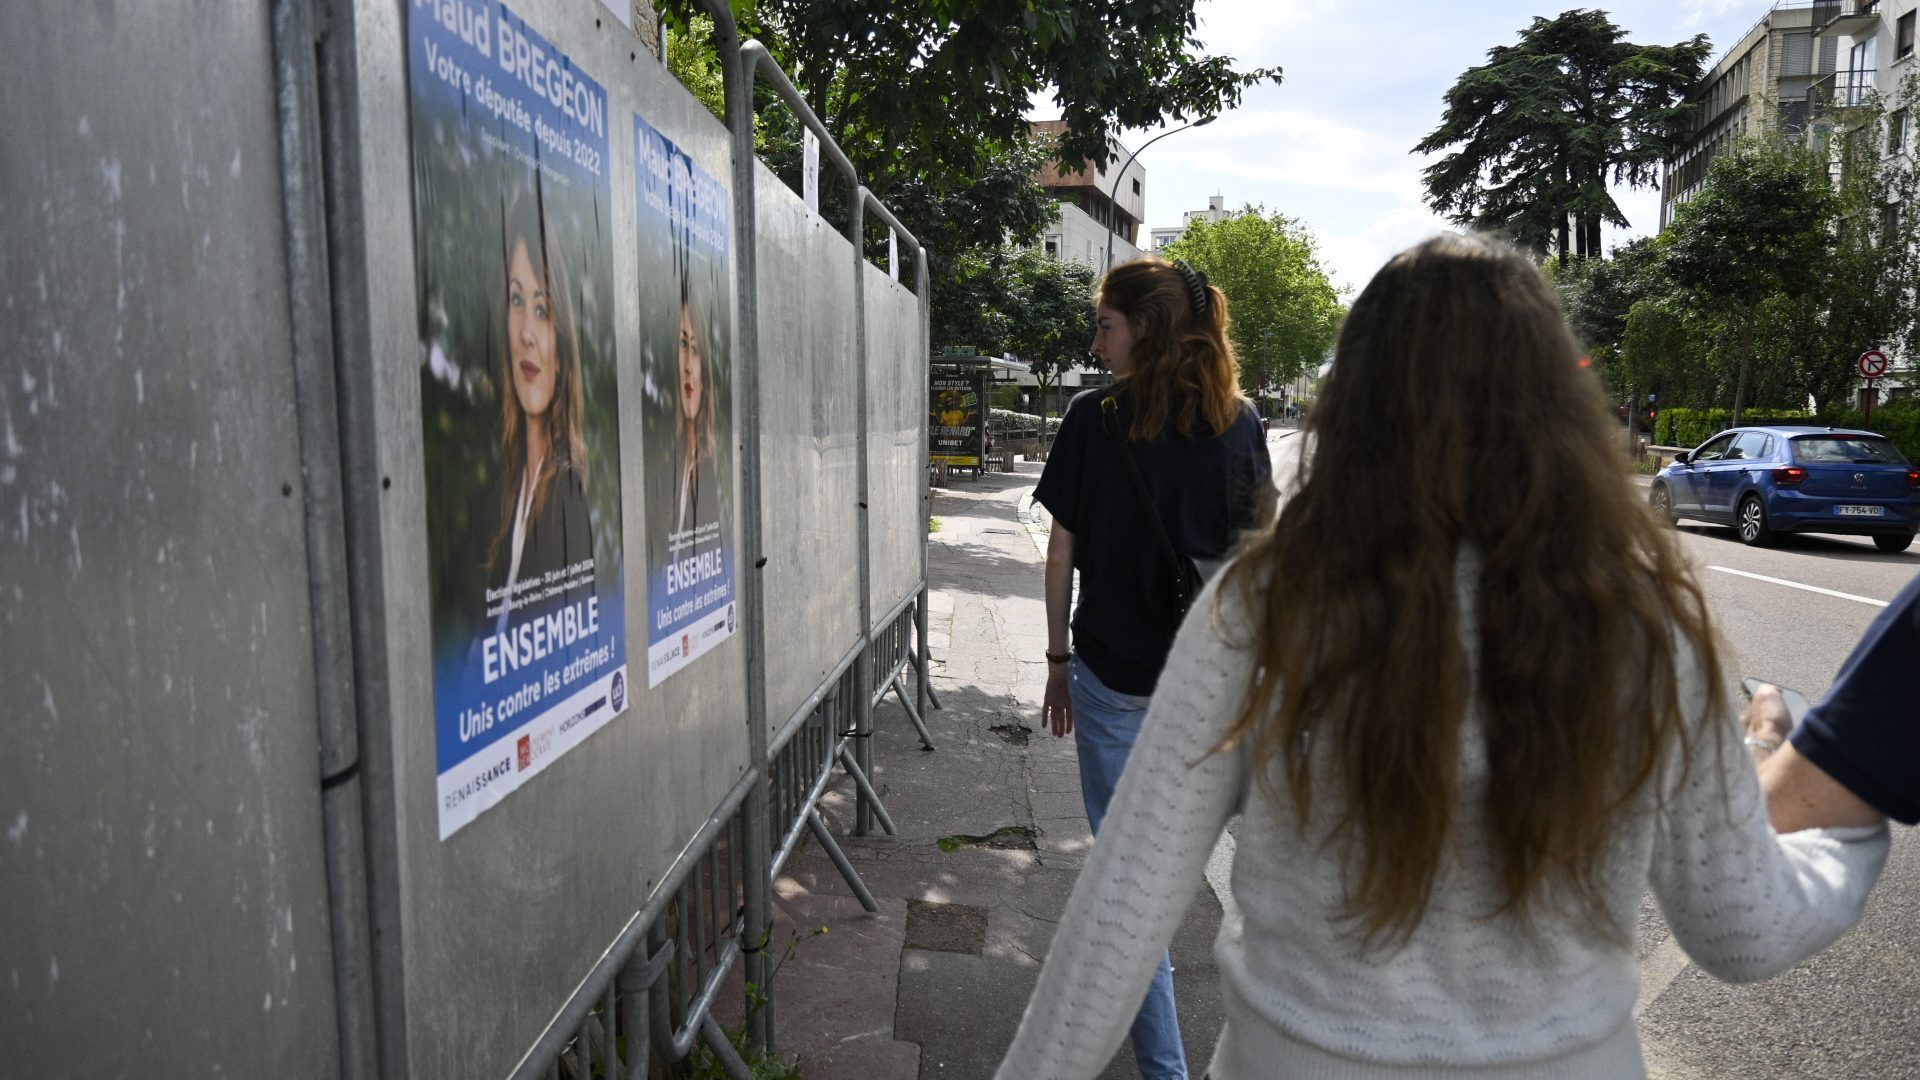 A woman looks at the poster of Ensemble candidate Maud Bregeon in Sceaux (Photo by MAGALI COHEN/Hans Lucas/AFP via Getty Images)